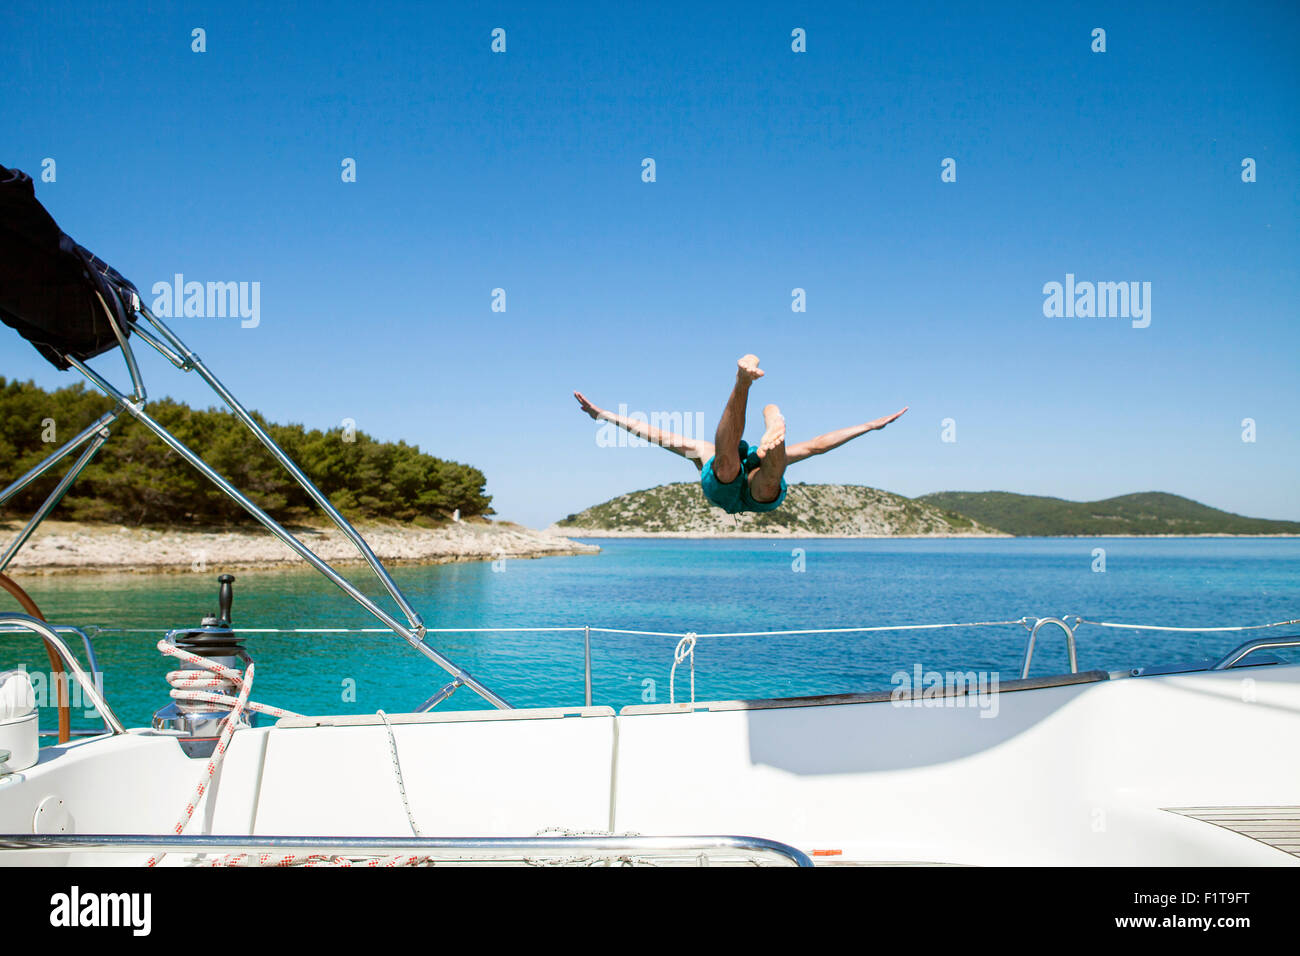 Young man diving into water from sailboat, Adriatic Sea Stock Photo